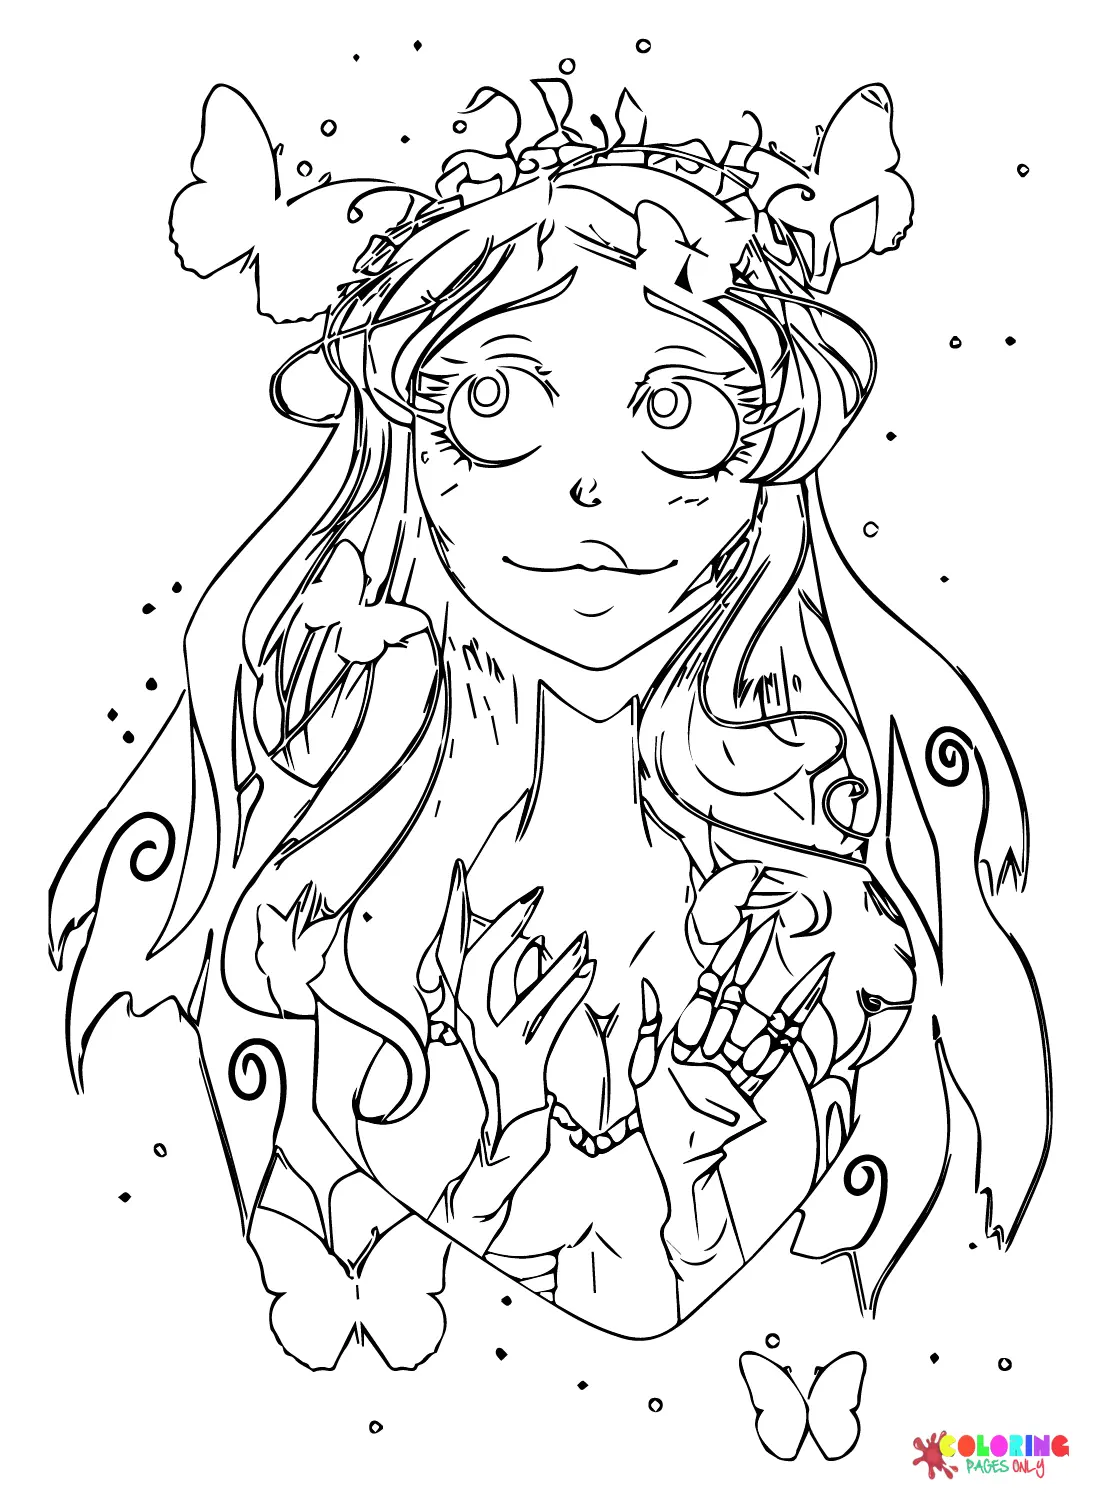 Corpse Bride Coloring Pages